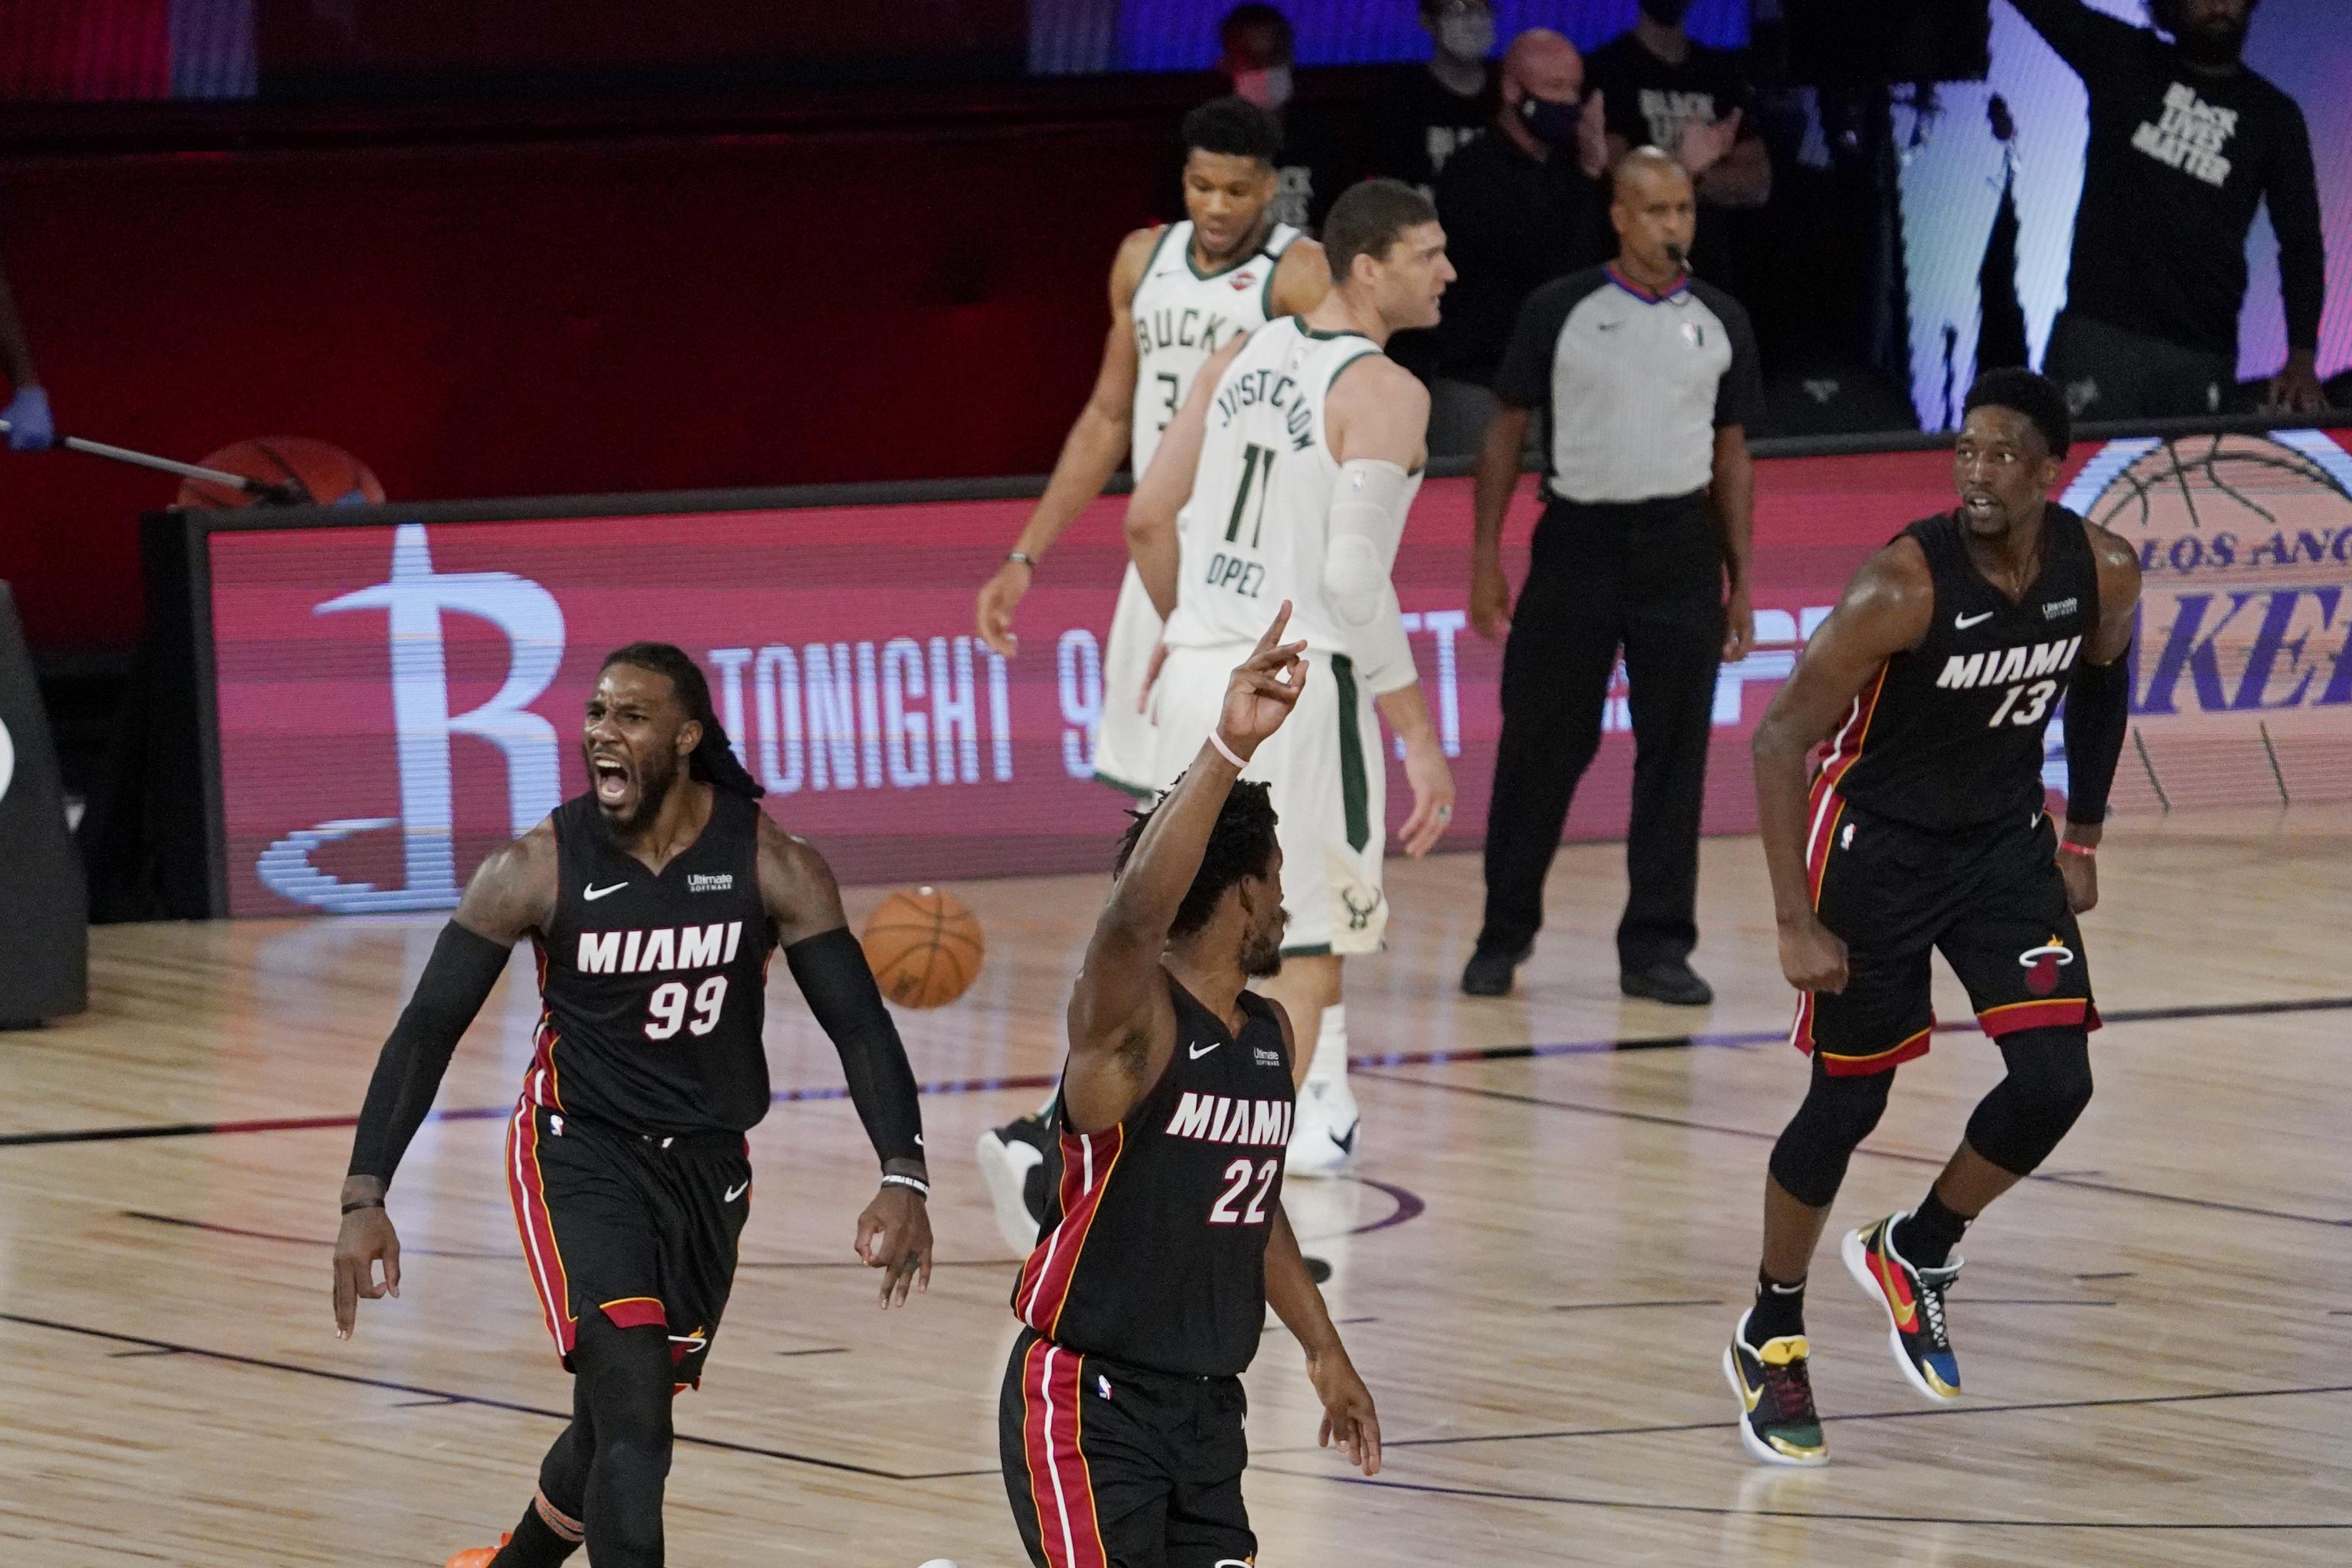 Nba Playoff Schedule 2020 Odds Game Times Tv And Live Stream For Sunday Bleacher Report Latest News Videos And Highlights